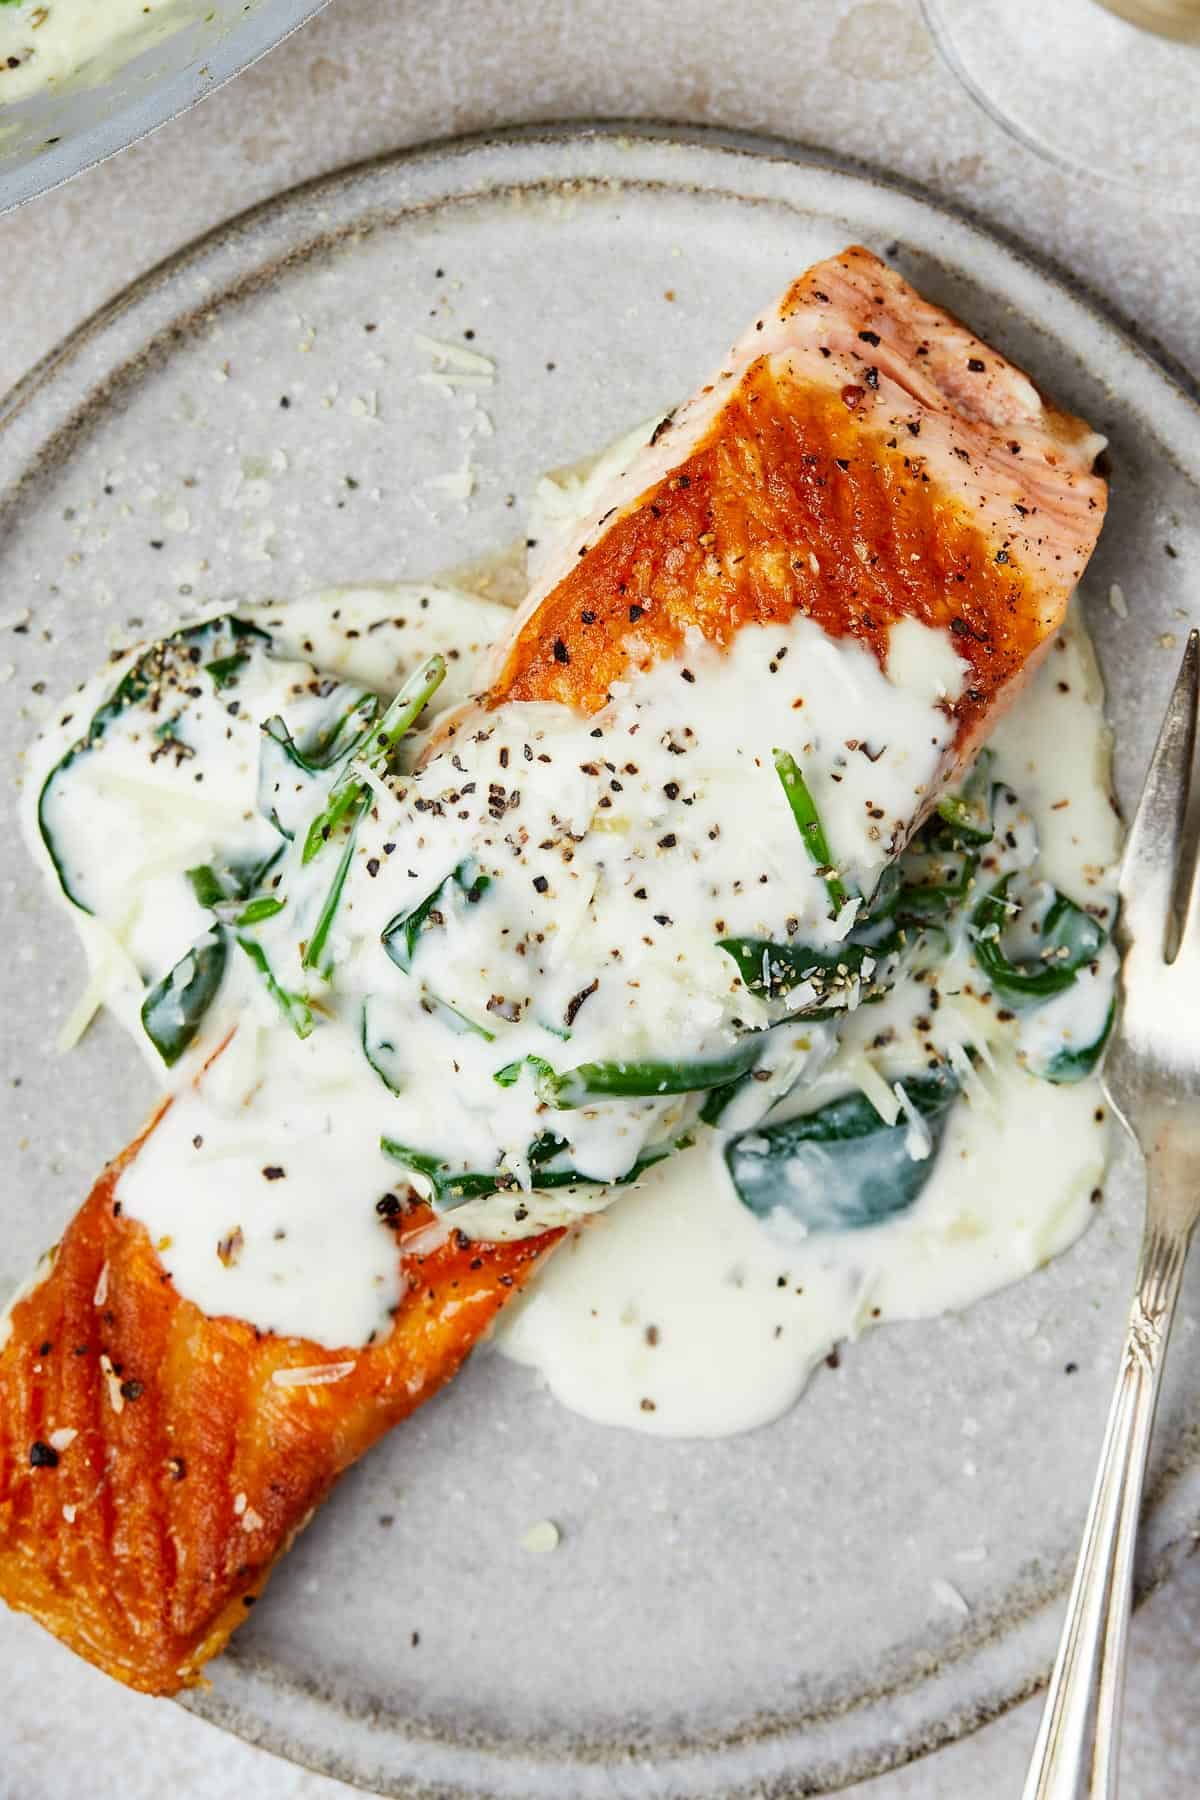 A salmon fillet topped with creamy sauce on a small plate.